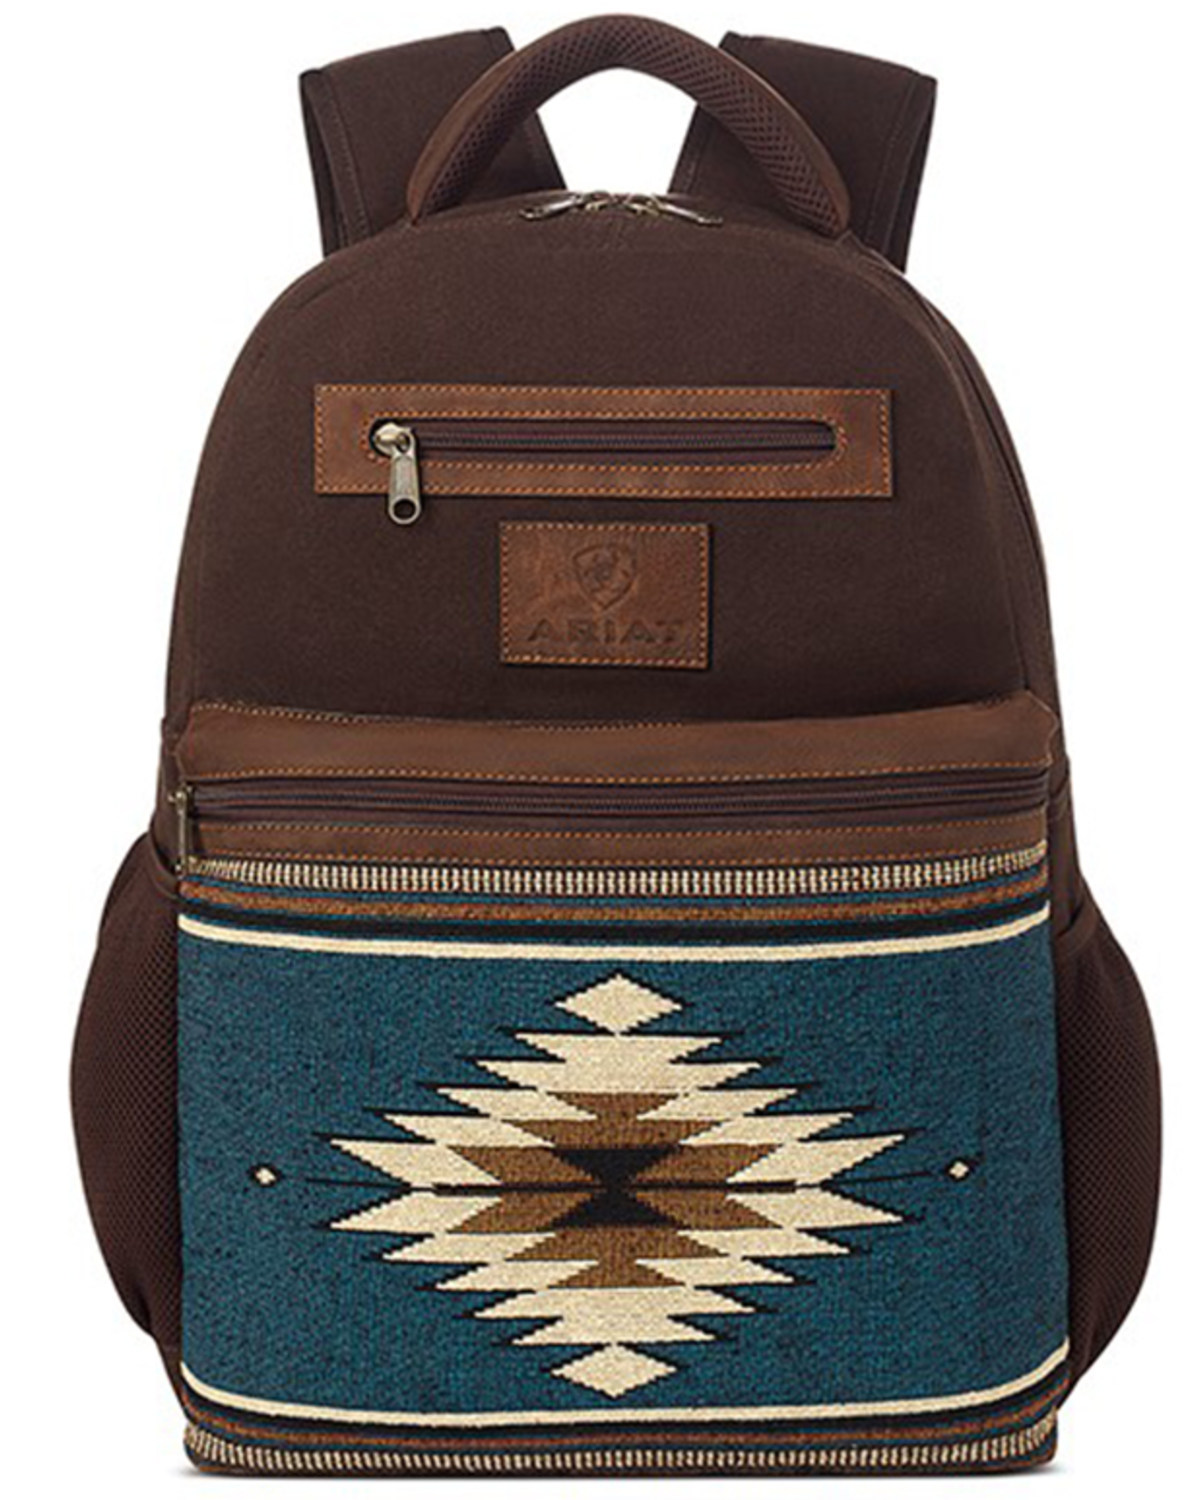 Ariat Southwestern Woven Backpack